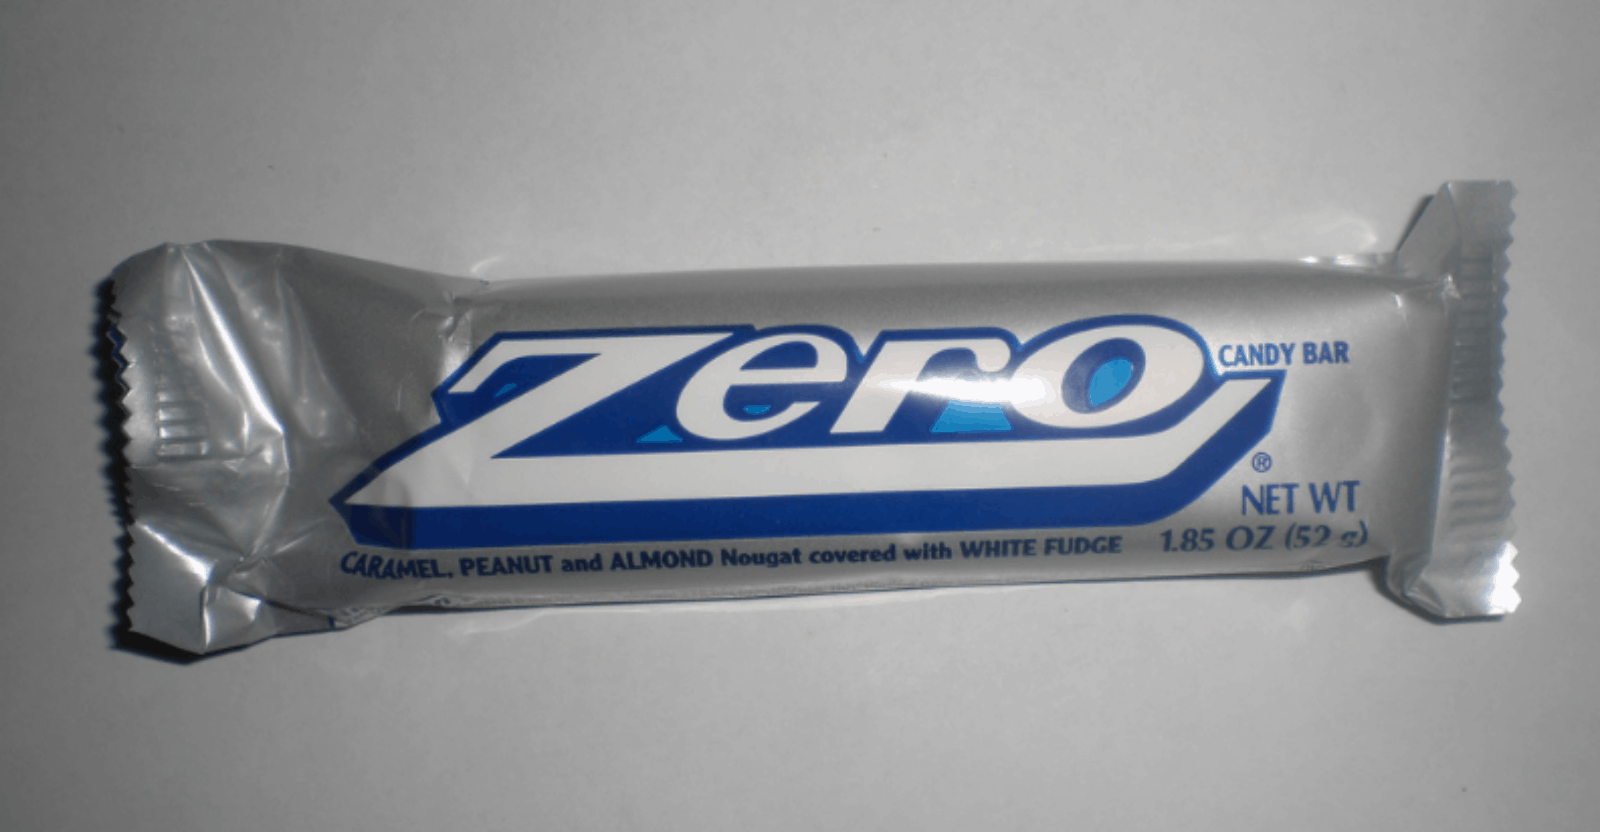 Zero-Candy-Bar-Review-1600x832.png